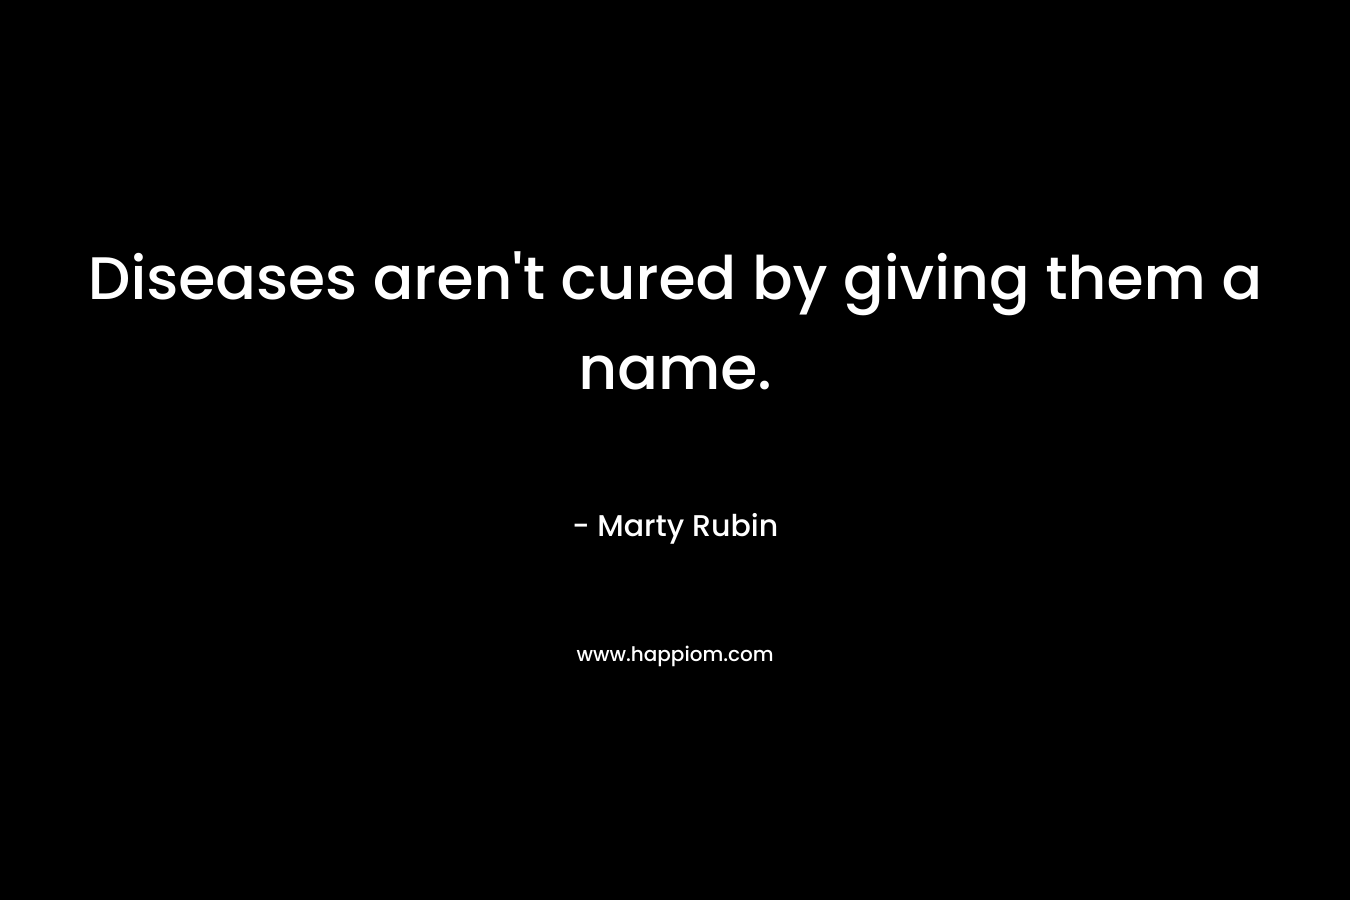 Diseases aren’t cured by giving them a name. – Marty Rubin